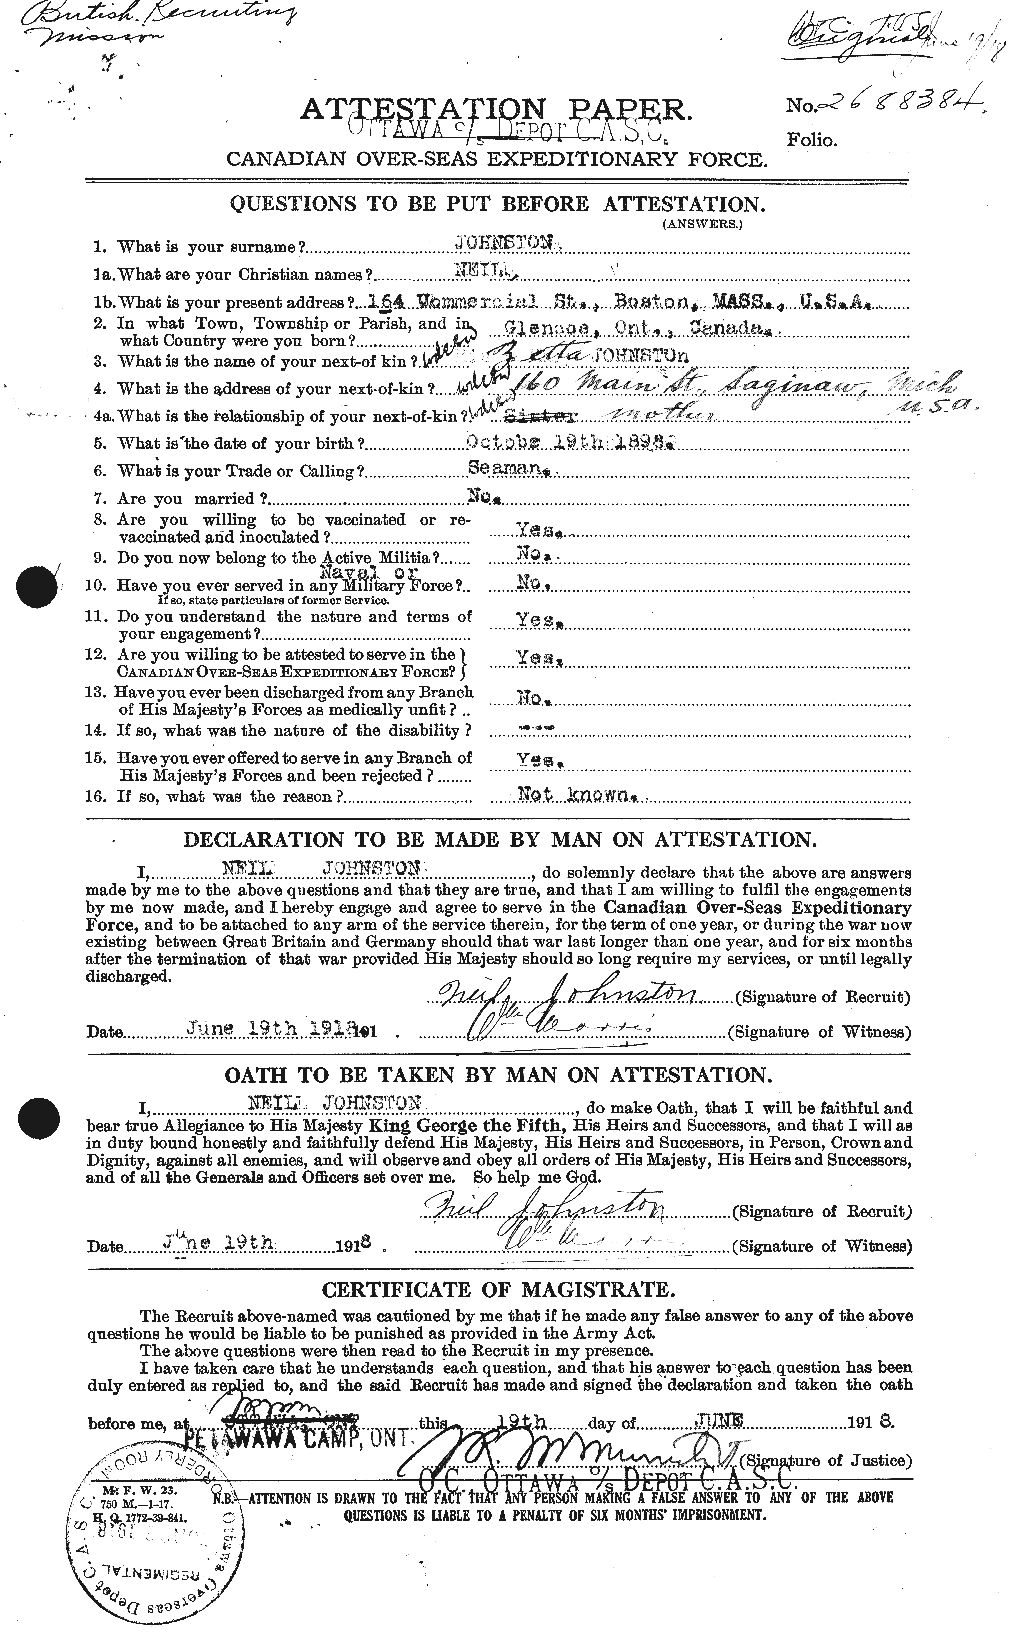 Personnel Records of the First World War - CEF 422998a